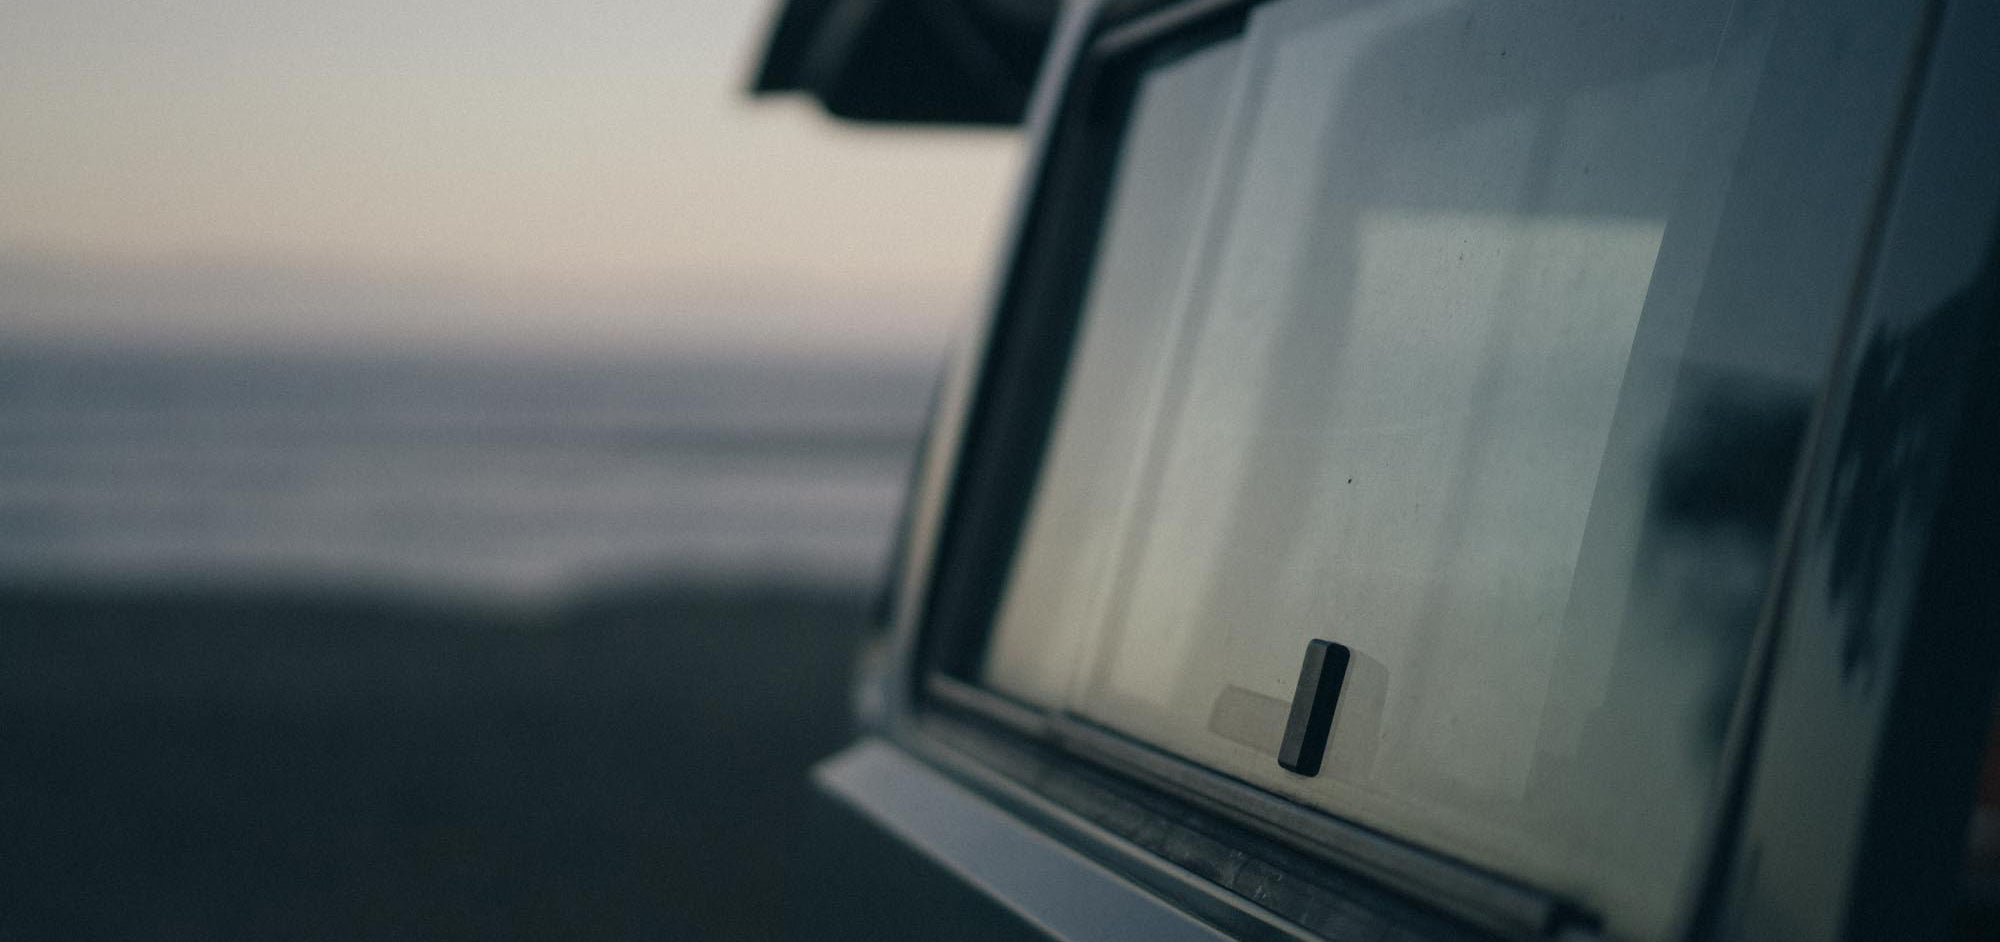 A dusky blue-hour sky reflects off the rear window of a classic VW Westy campervan